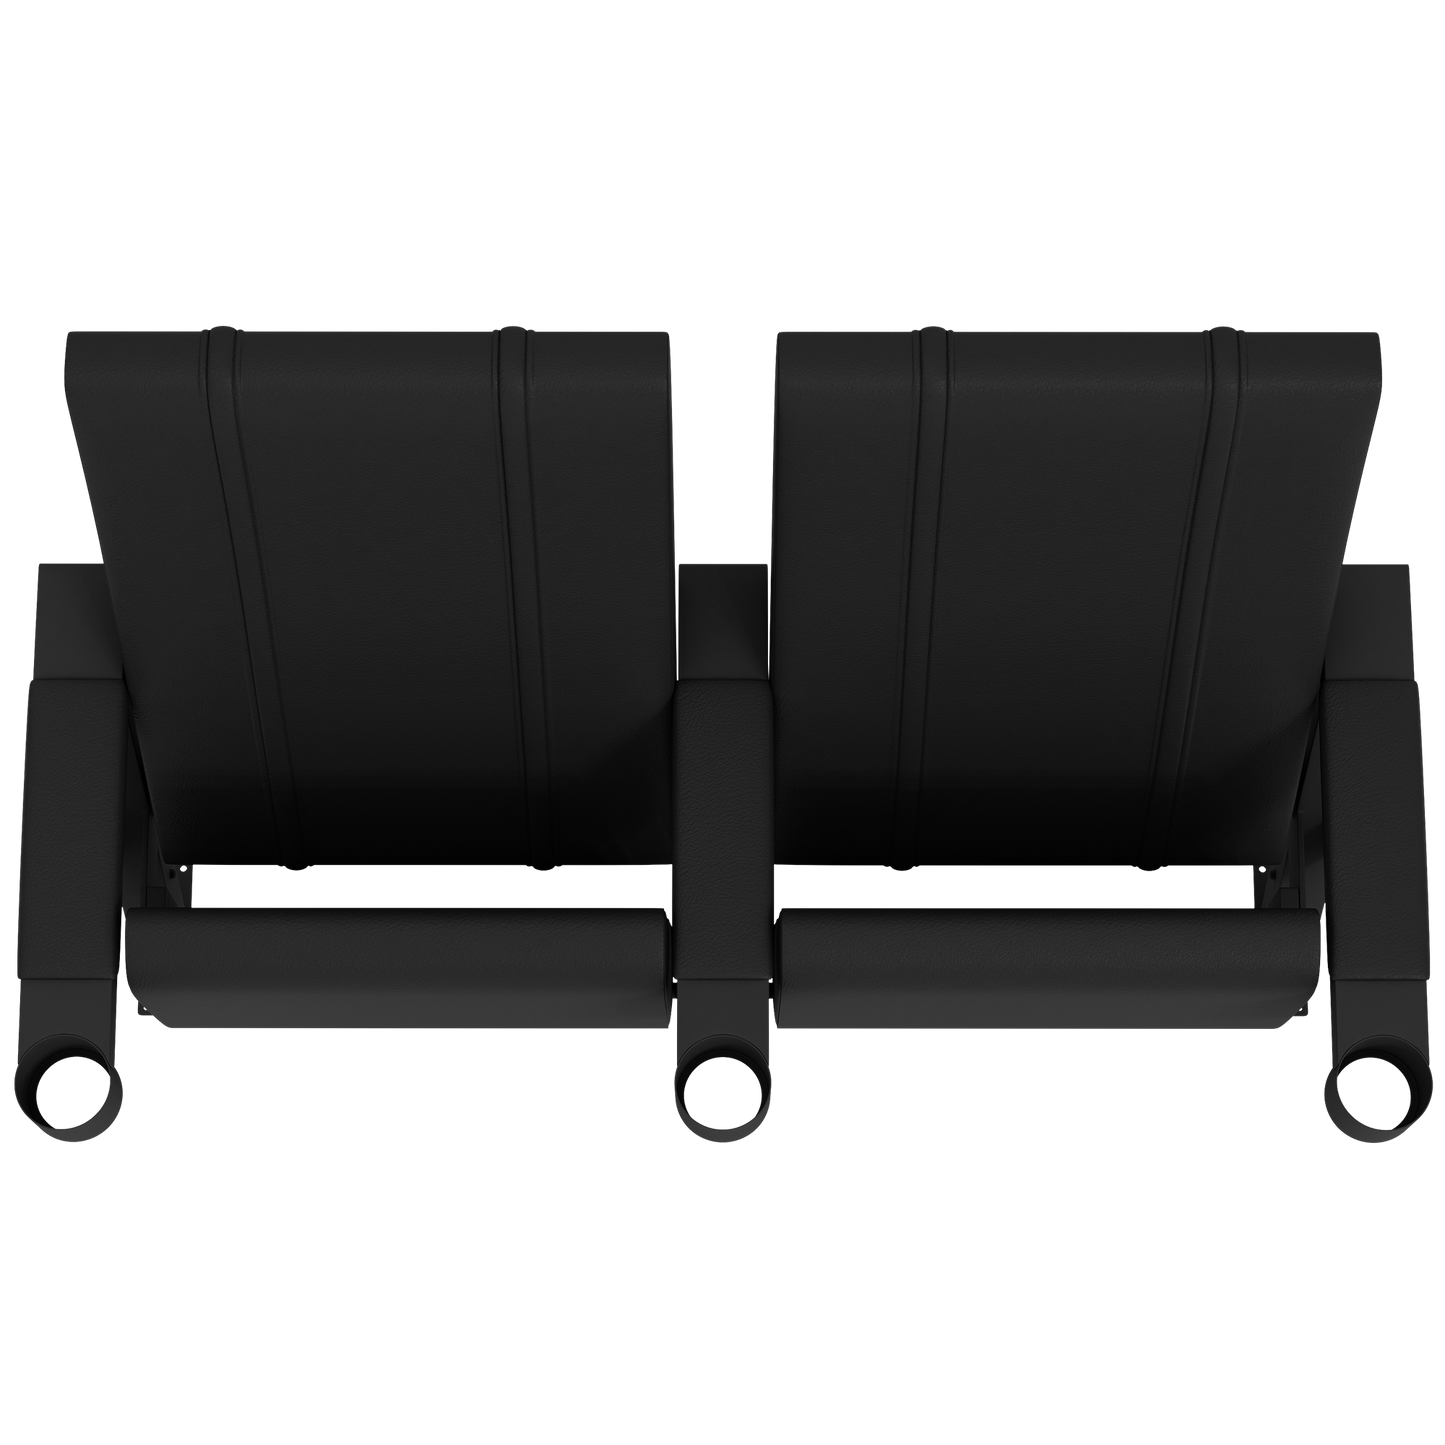 SuiteMax 3.5 VIP Seats with New York City FC Alternate Logo